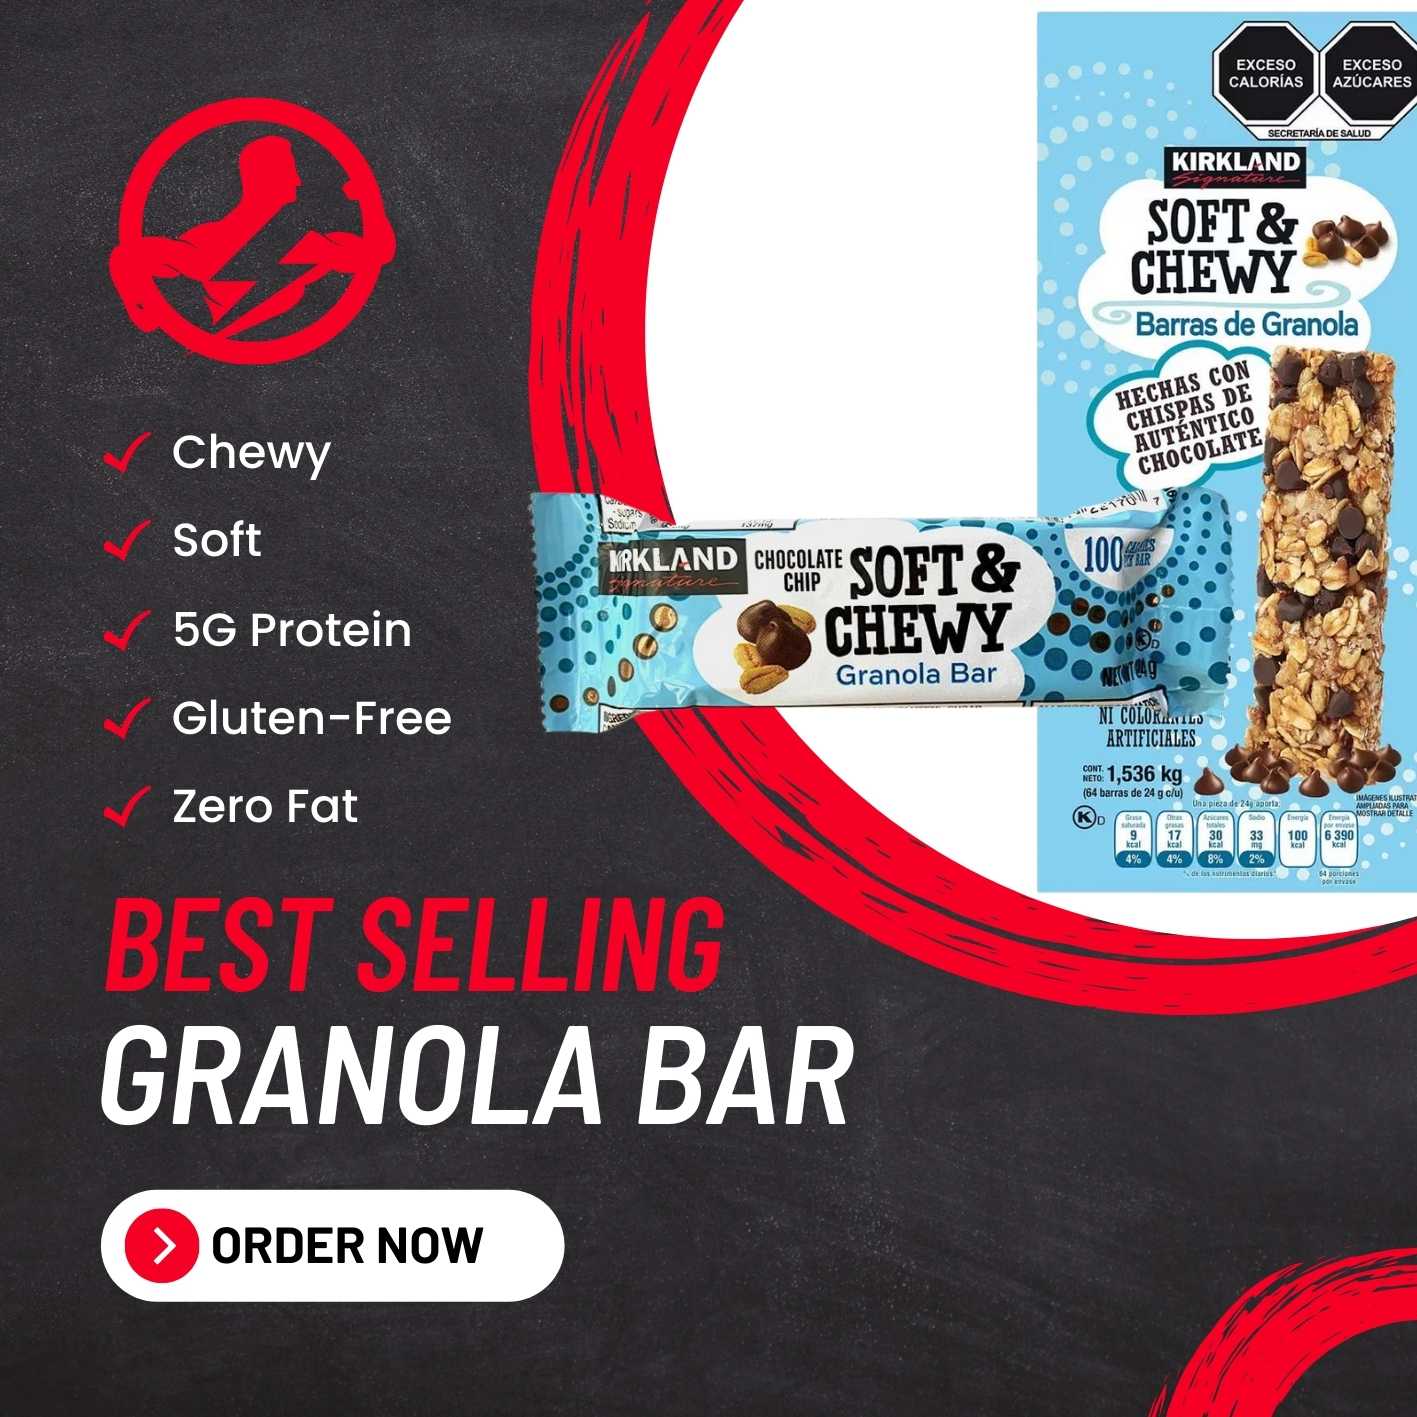 Kirkland Signature Dipped and Chewy Granola Bar, 1.49kg, 48-count